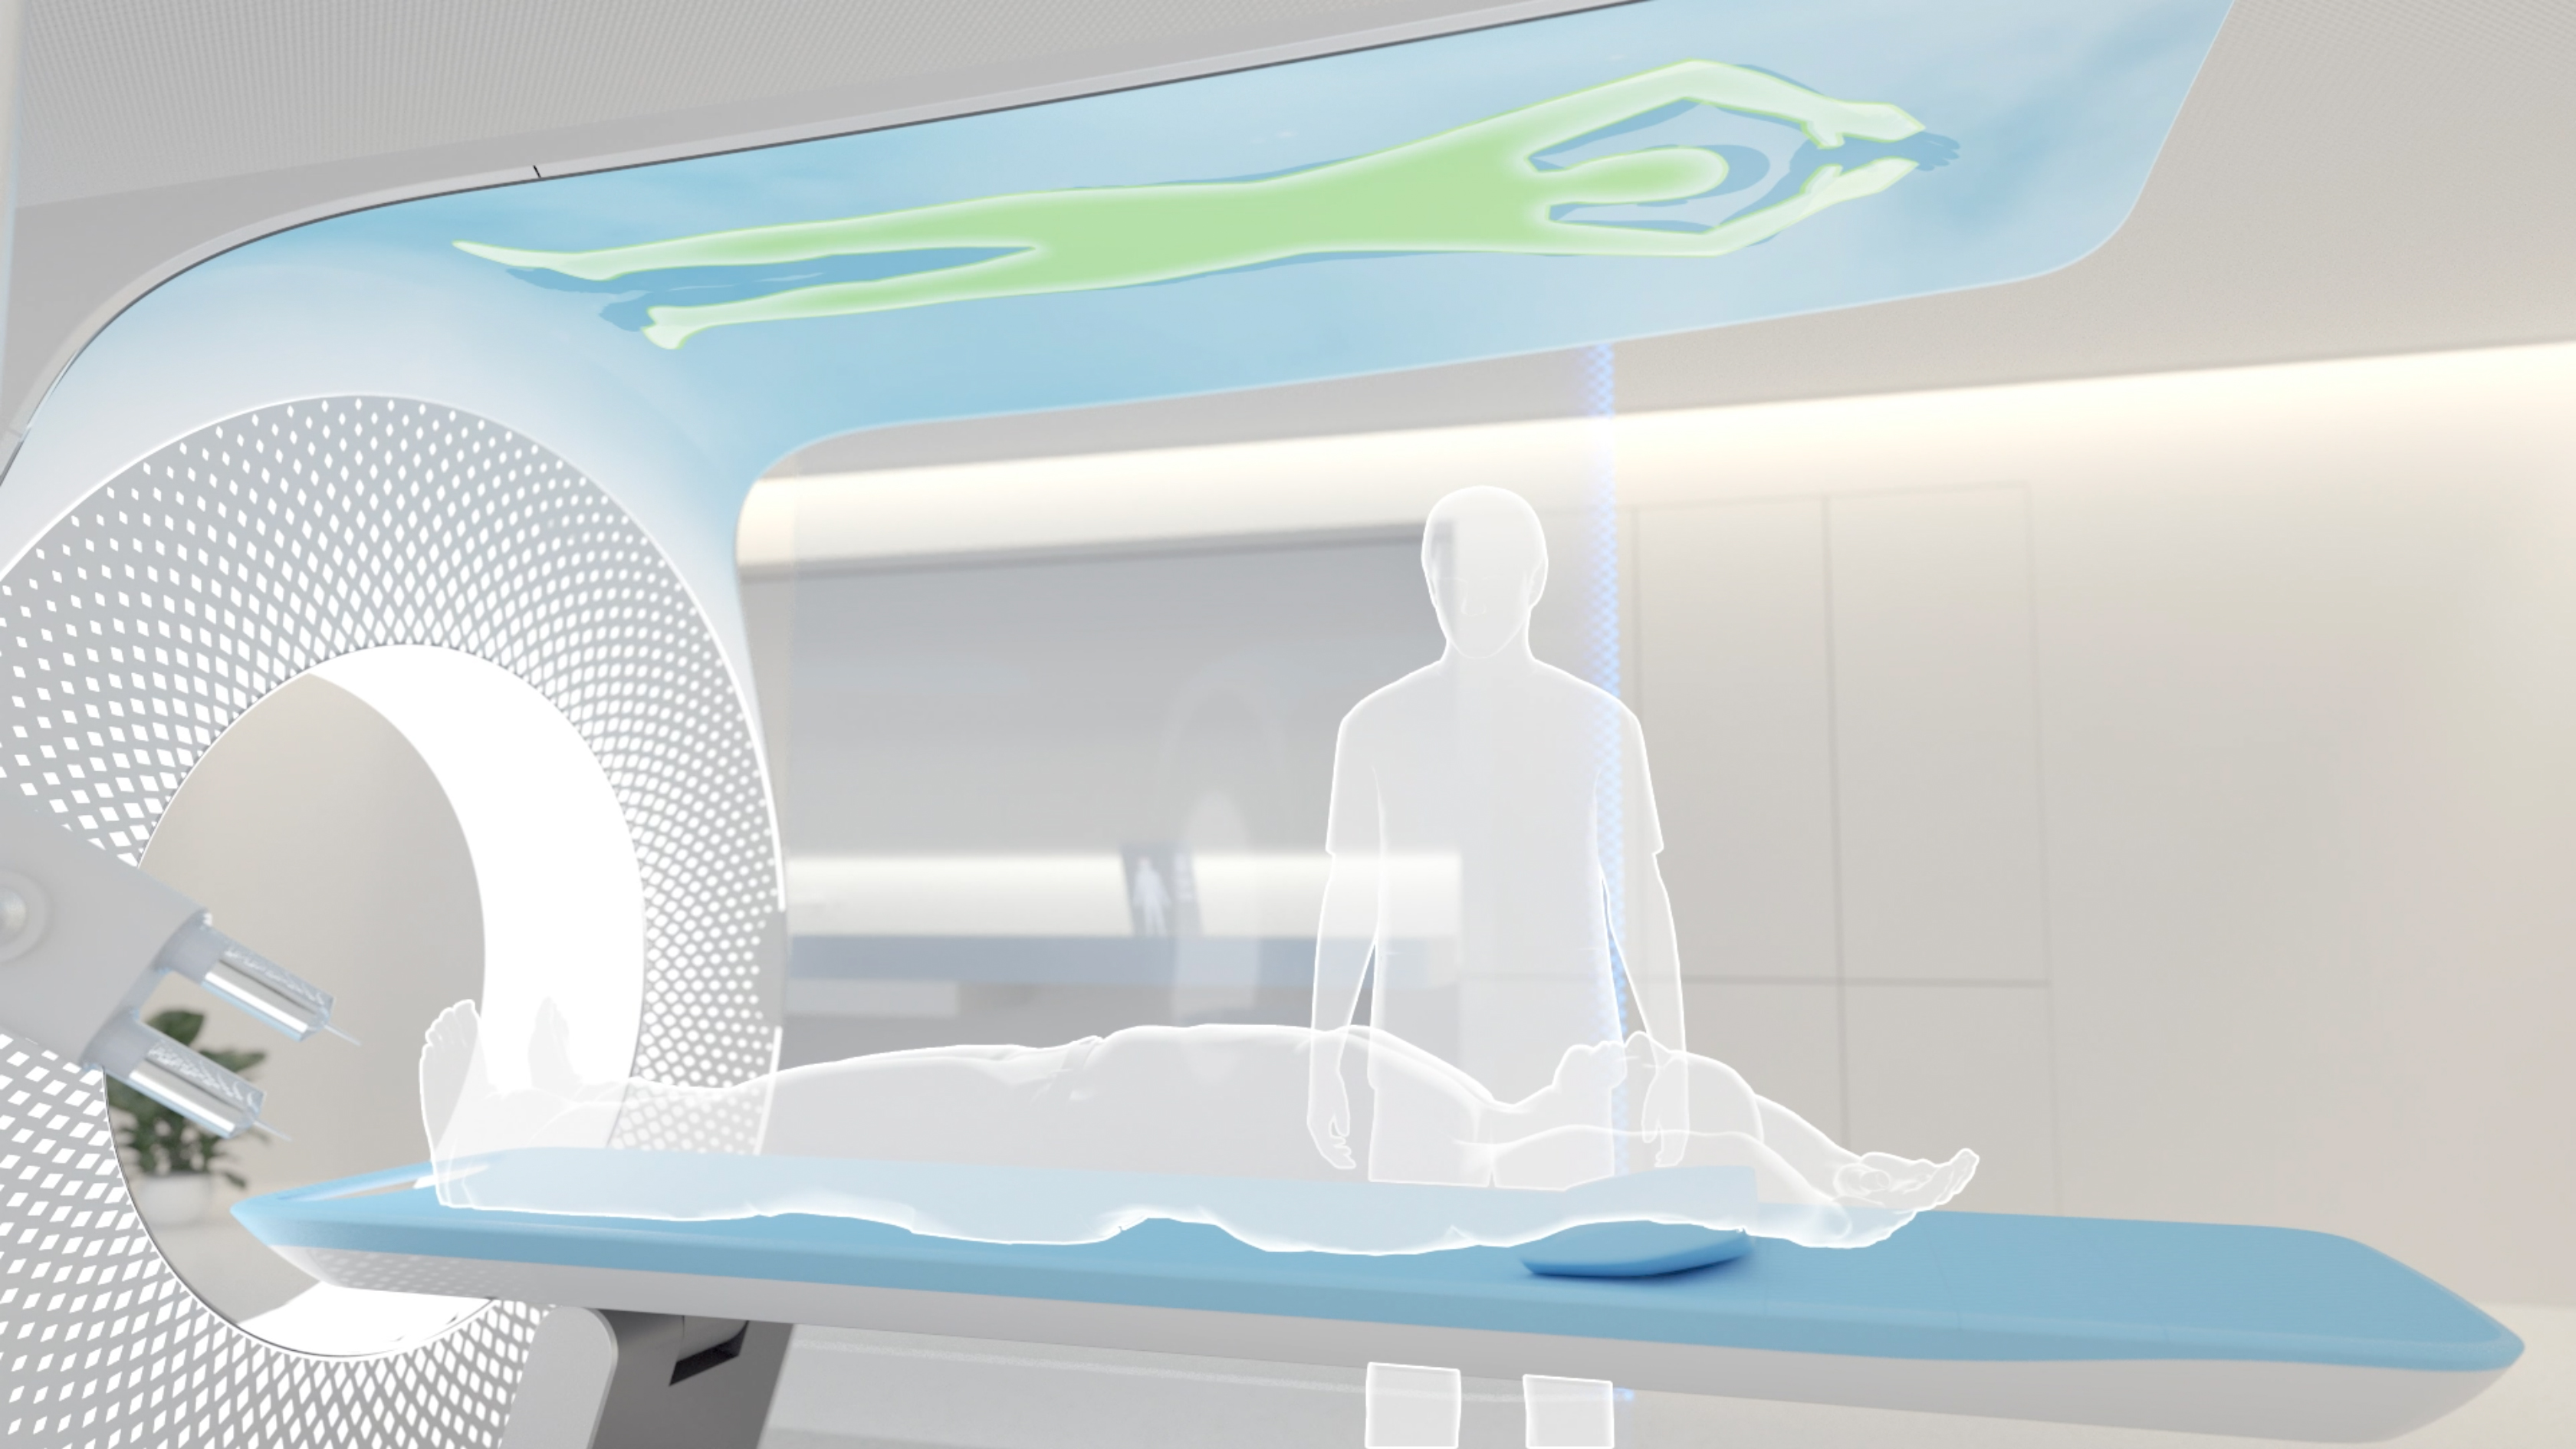 MUSE Design Winners - Philips Radiology Vision